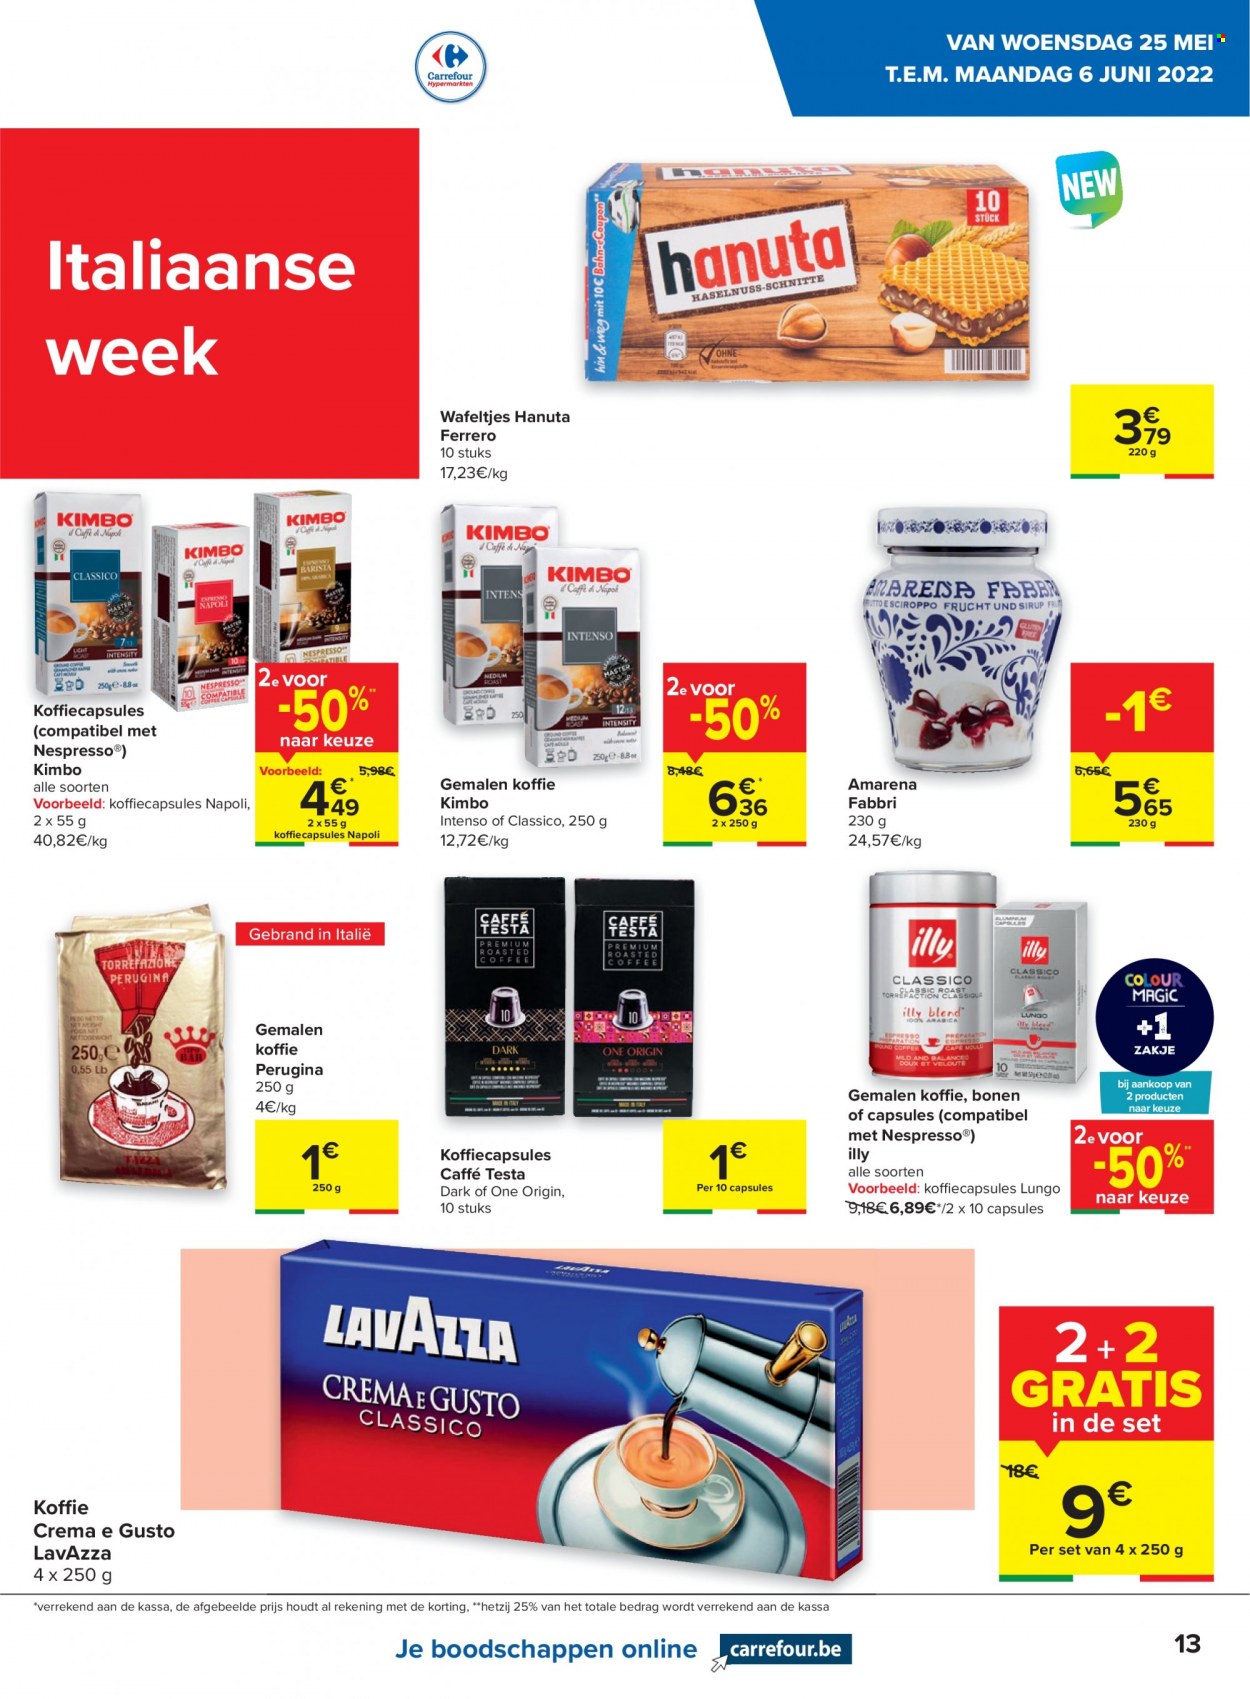 Catalogue Carrefour hypermarkt - 24.5.2022 - 30.5.2022. Page 13.